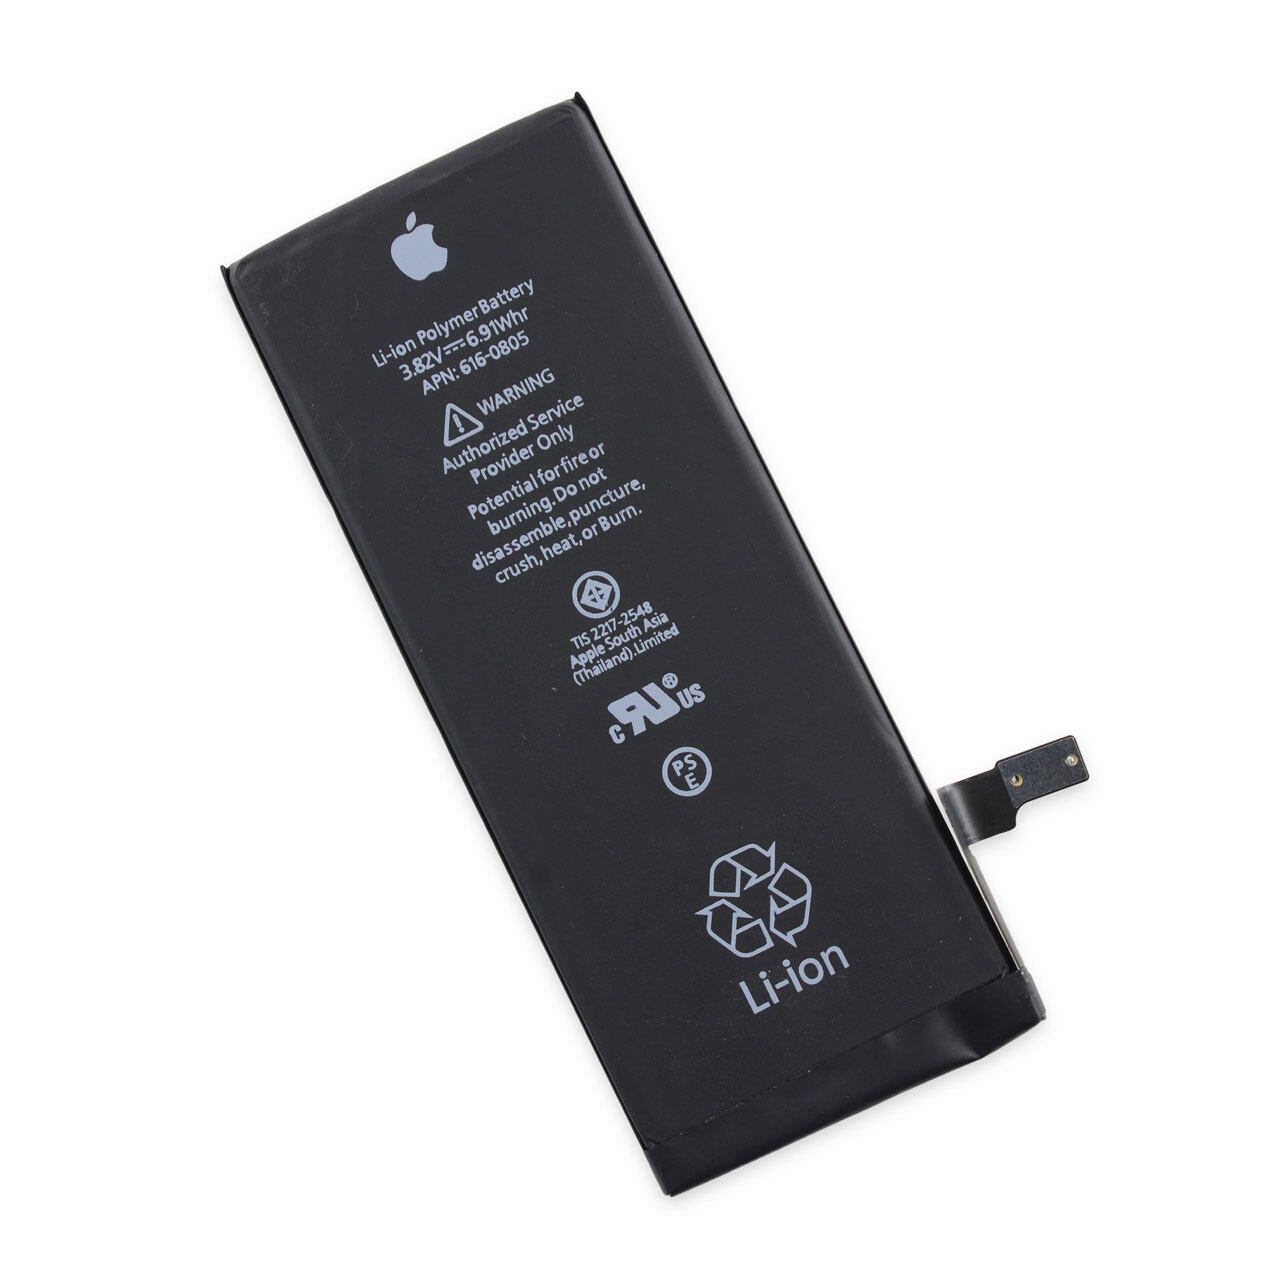 Wholesale OEM iPhone 6s Plus Battery: A Comprehensive Guide